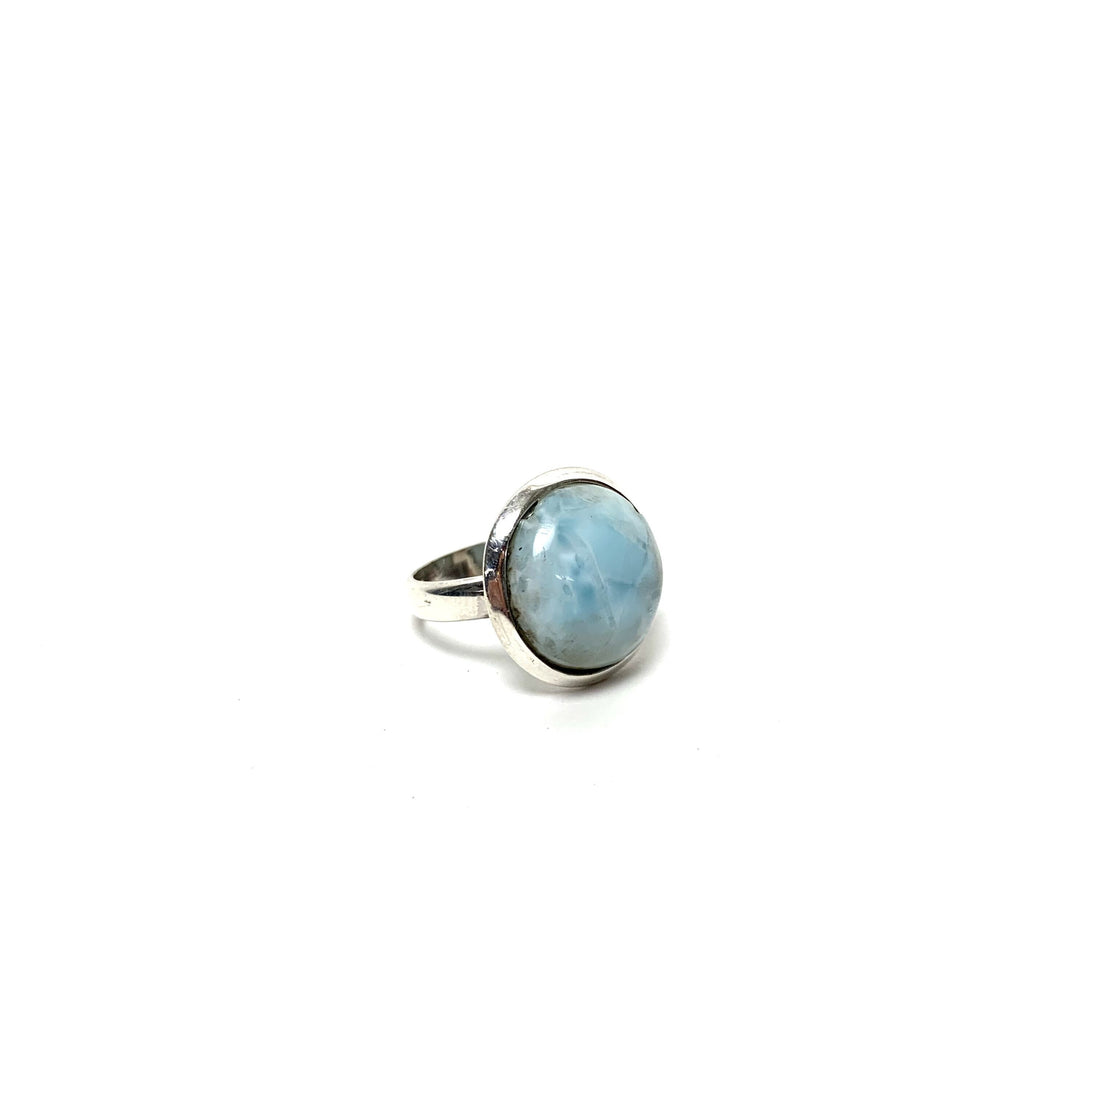 Larimar Silver Ring Rings Crystals M. $60.00 Size 7.5 